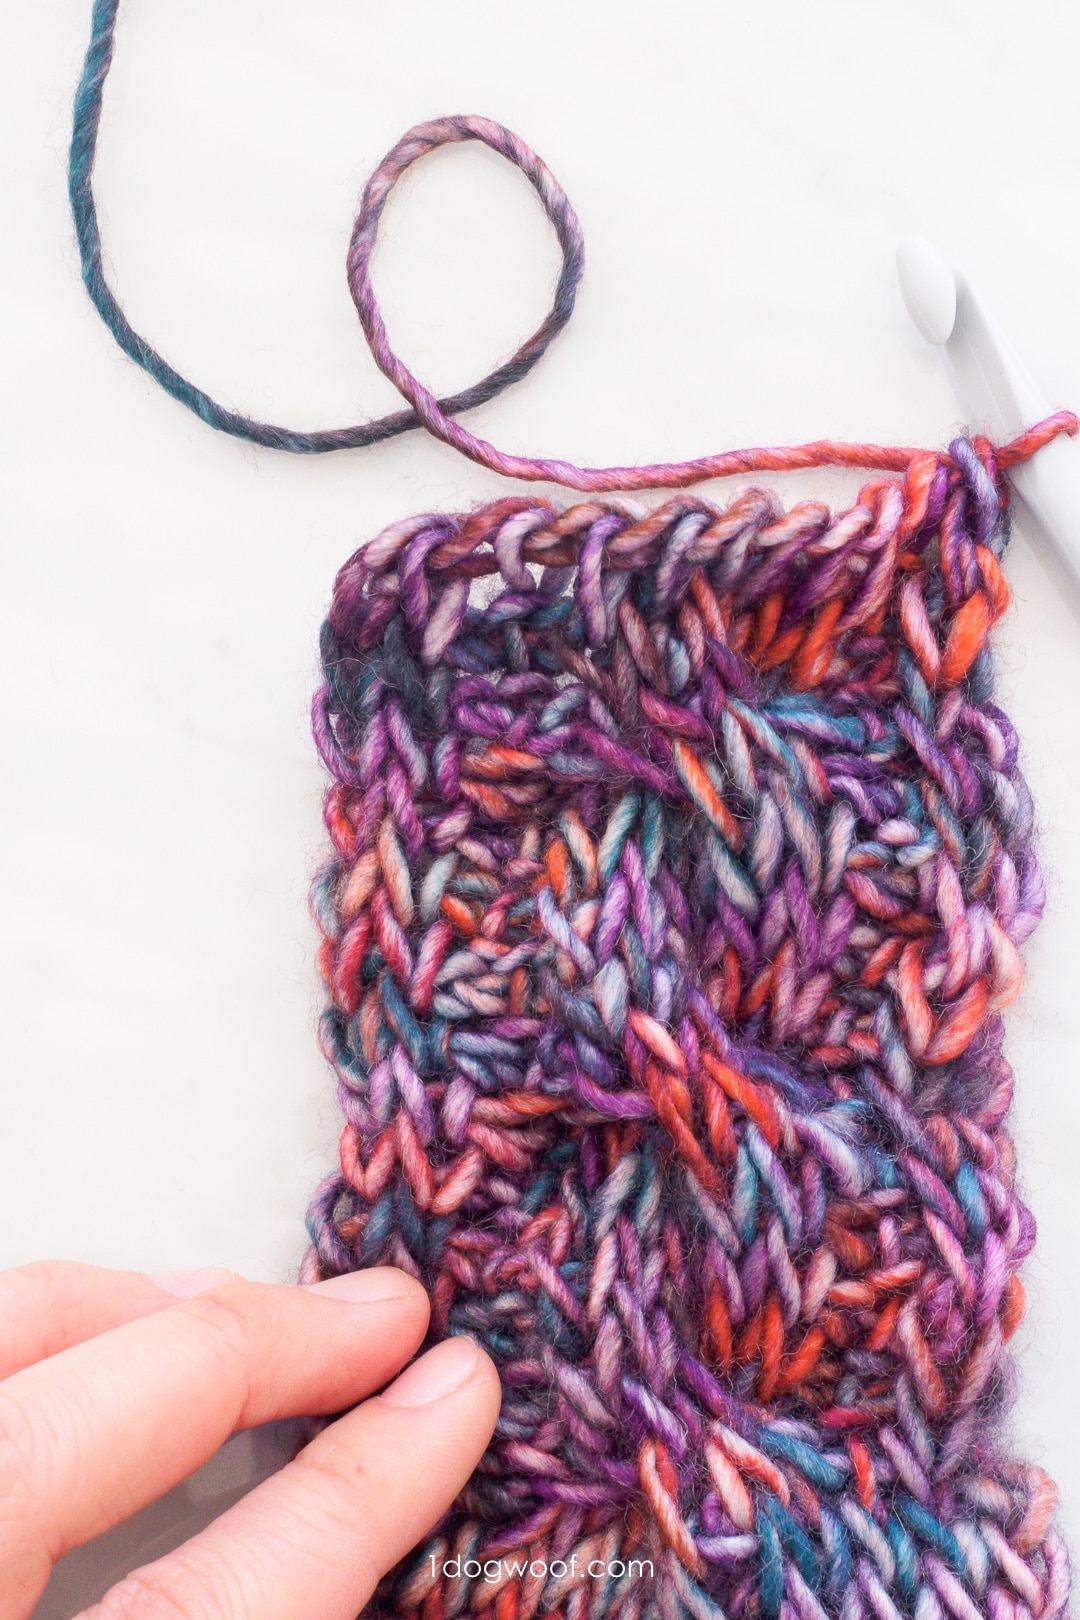 Tunisian Crochet Cables Video Tutorial - One Dog Woof